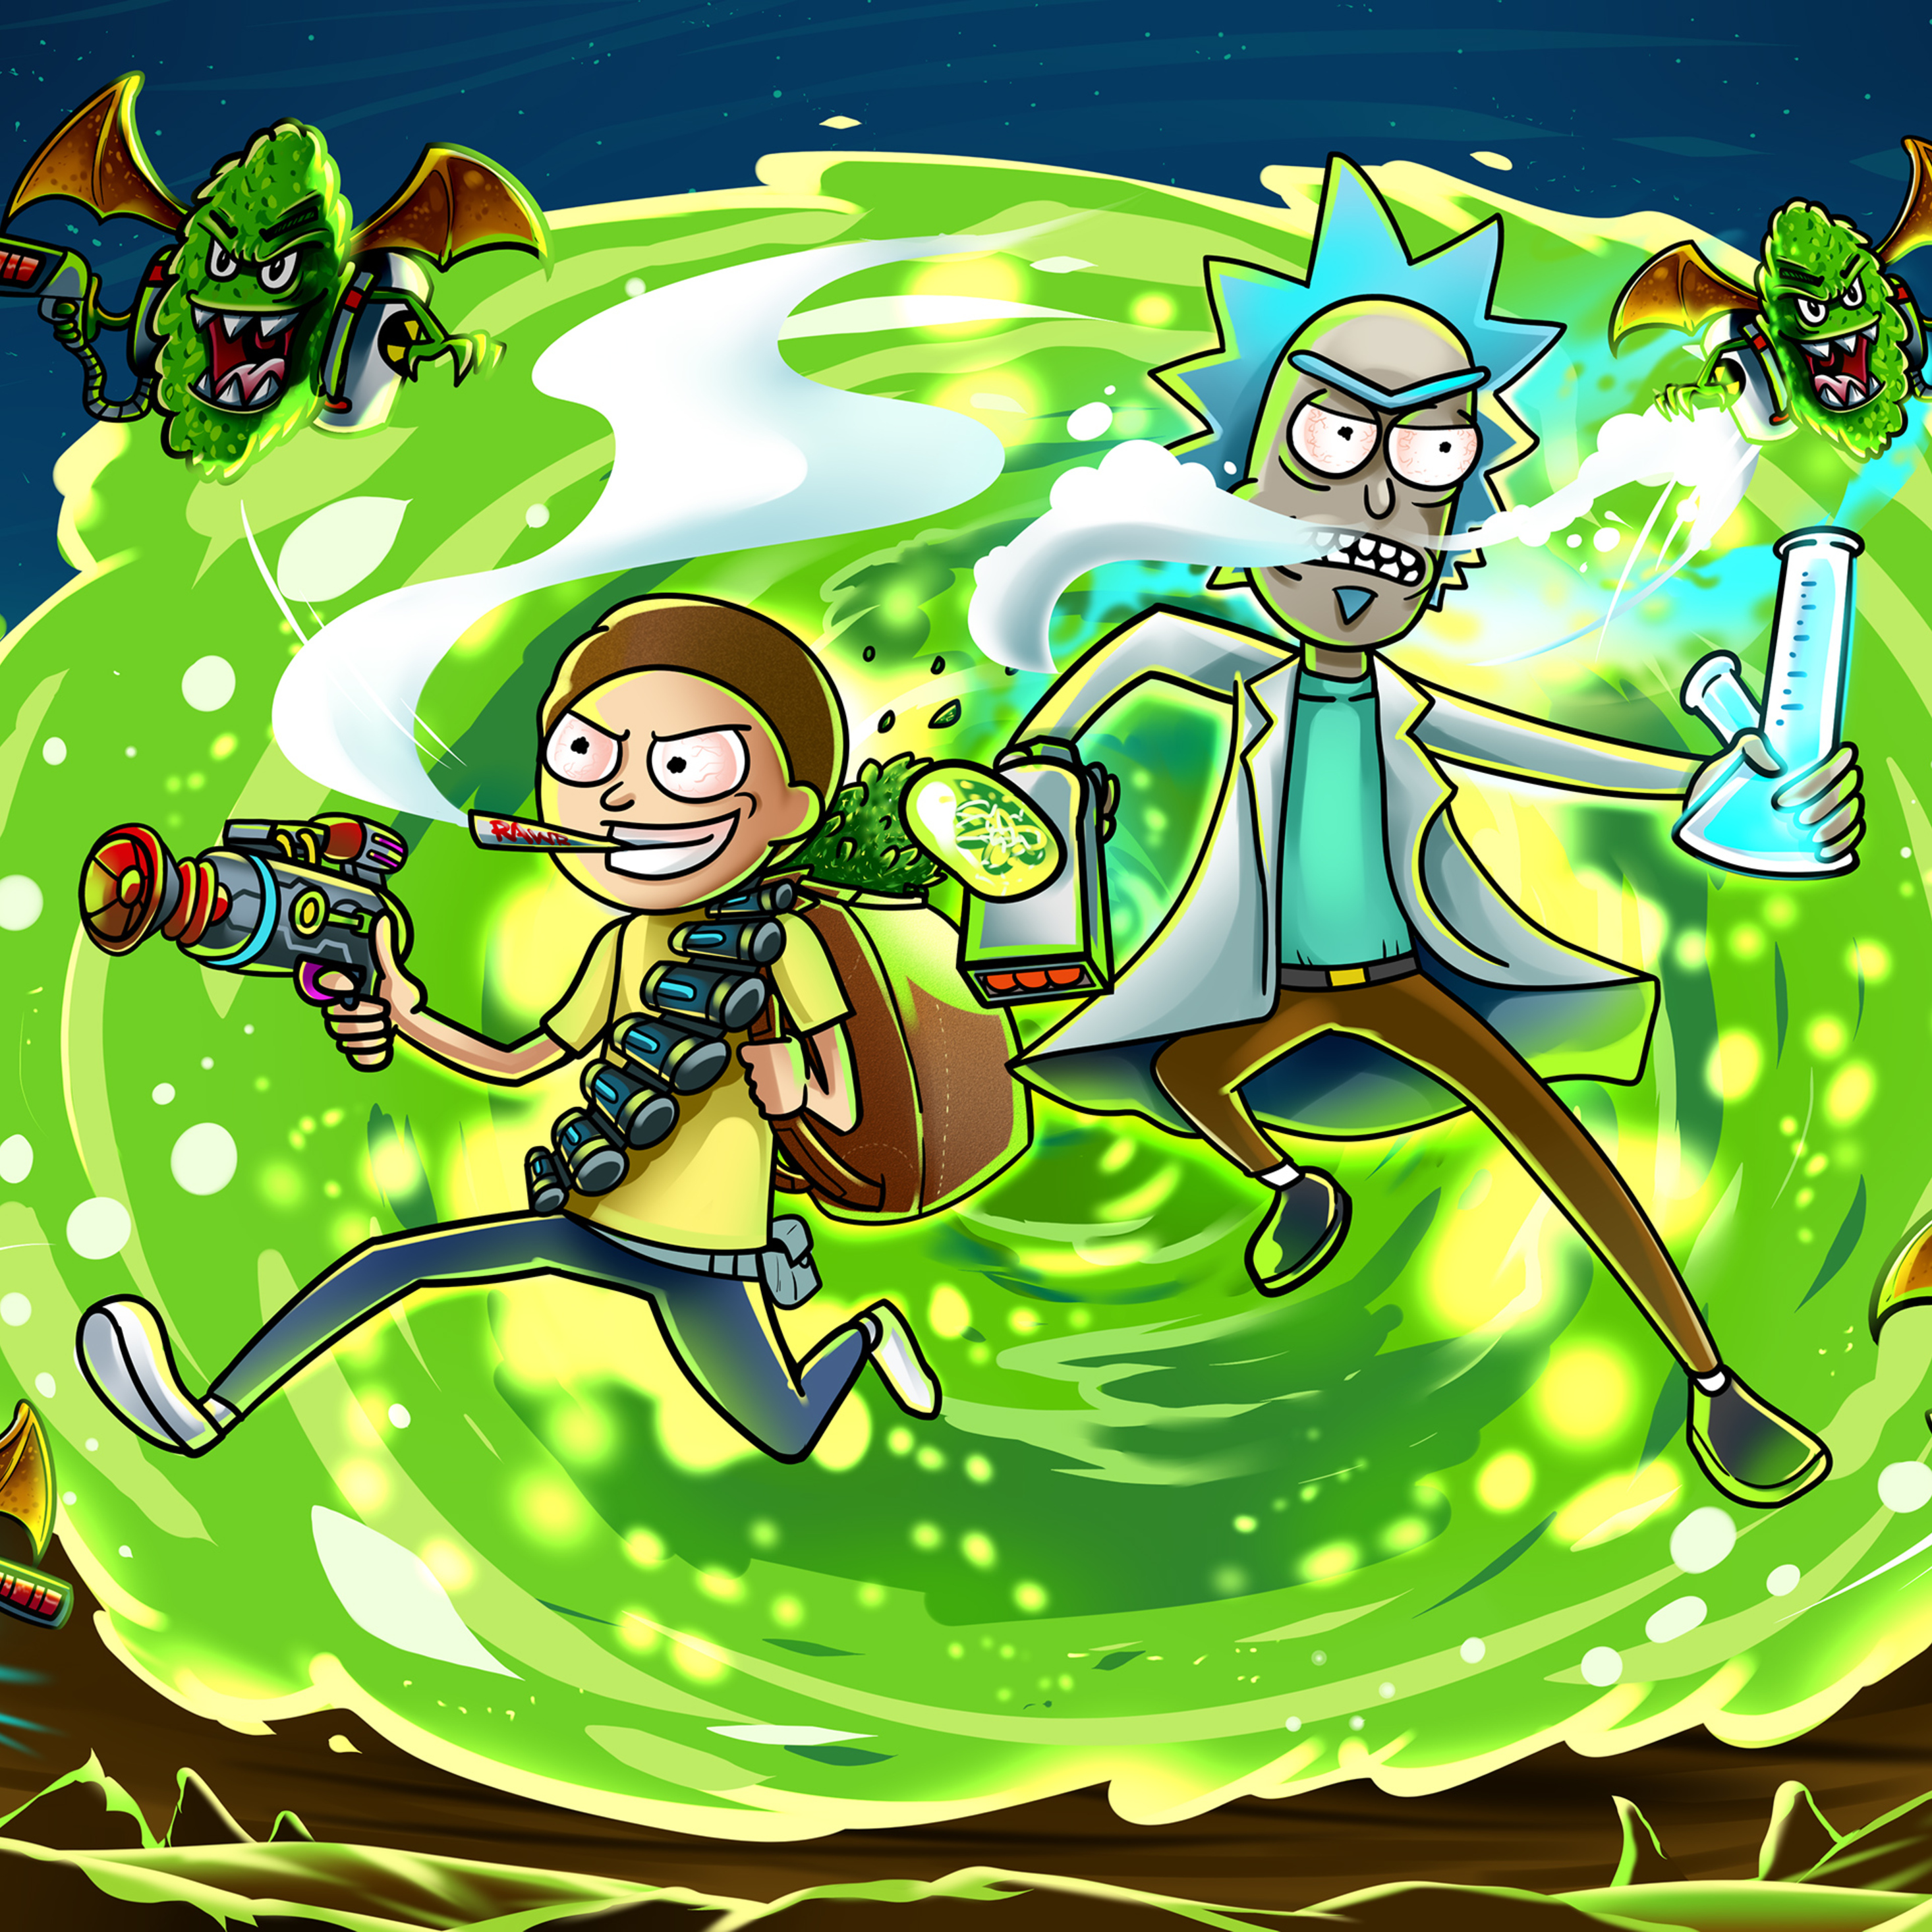 Rick and morty another. Рик и Морти. Арт Рик и Морти 4к. Rick and Morty обои. Rick and Morty poster Rick.